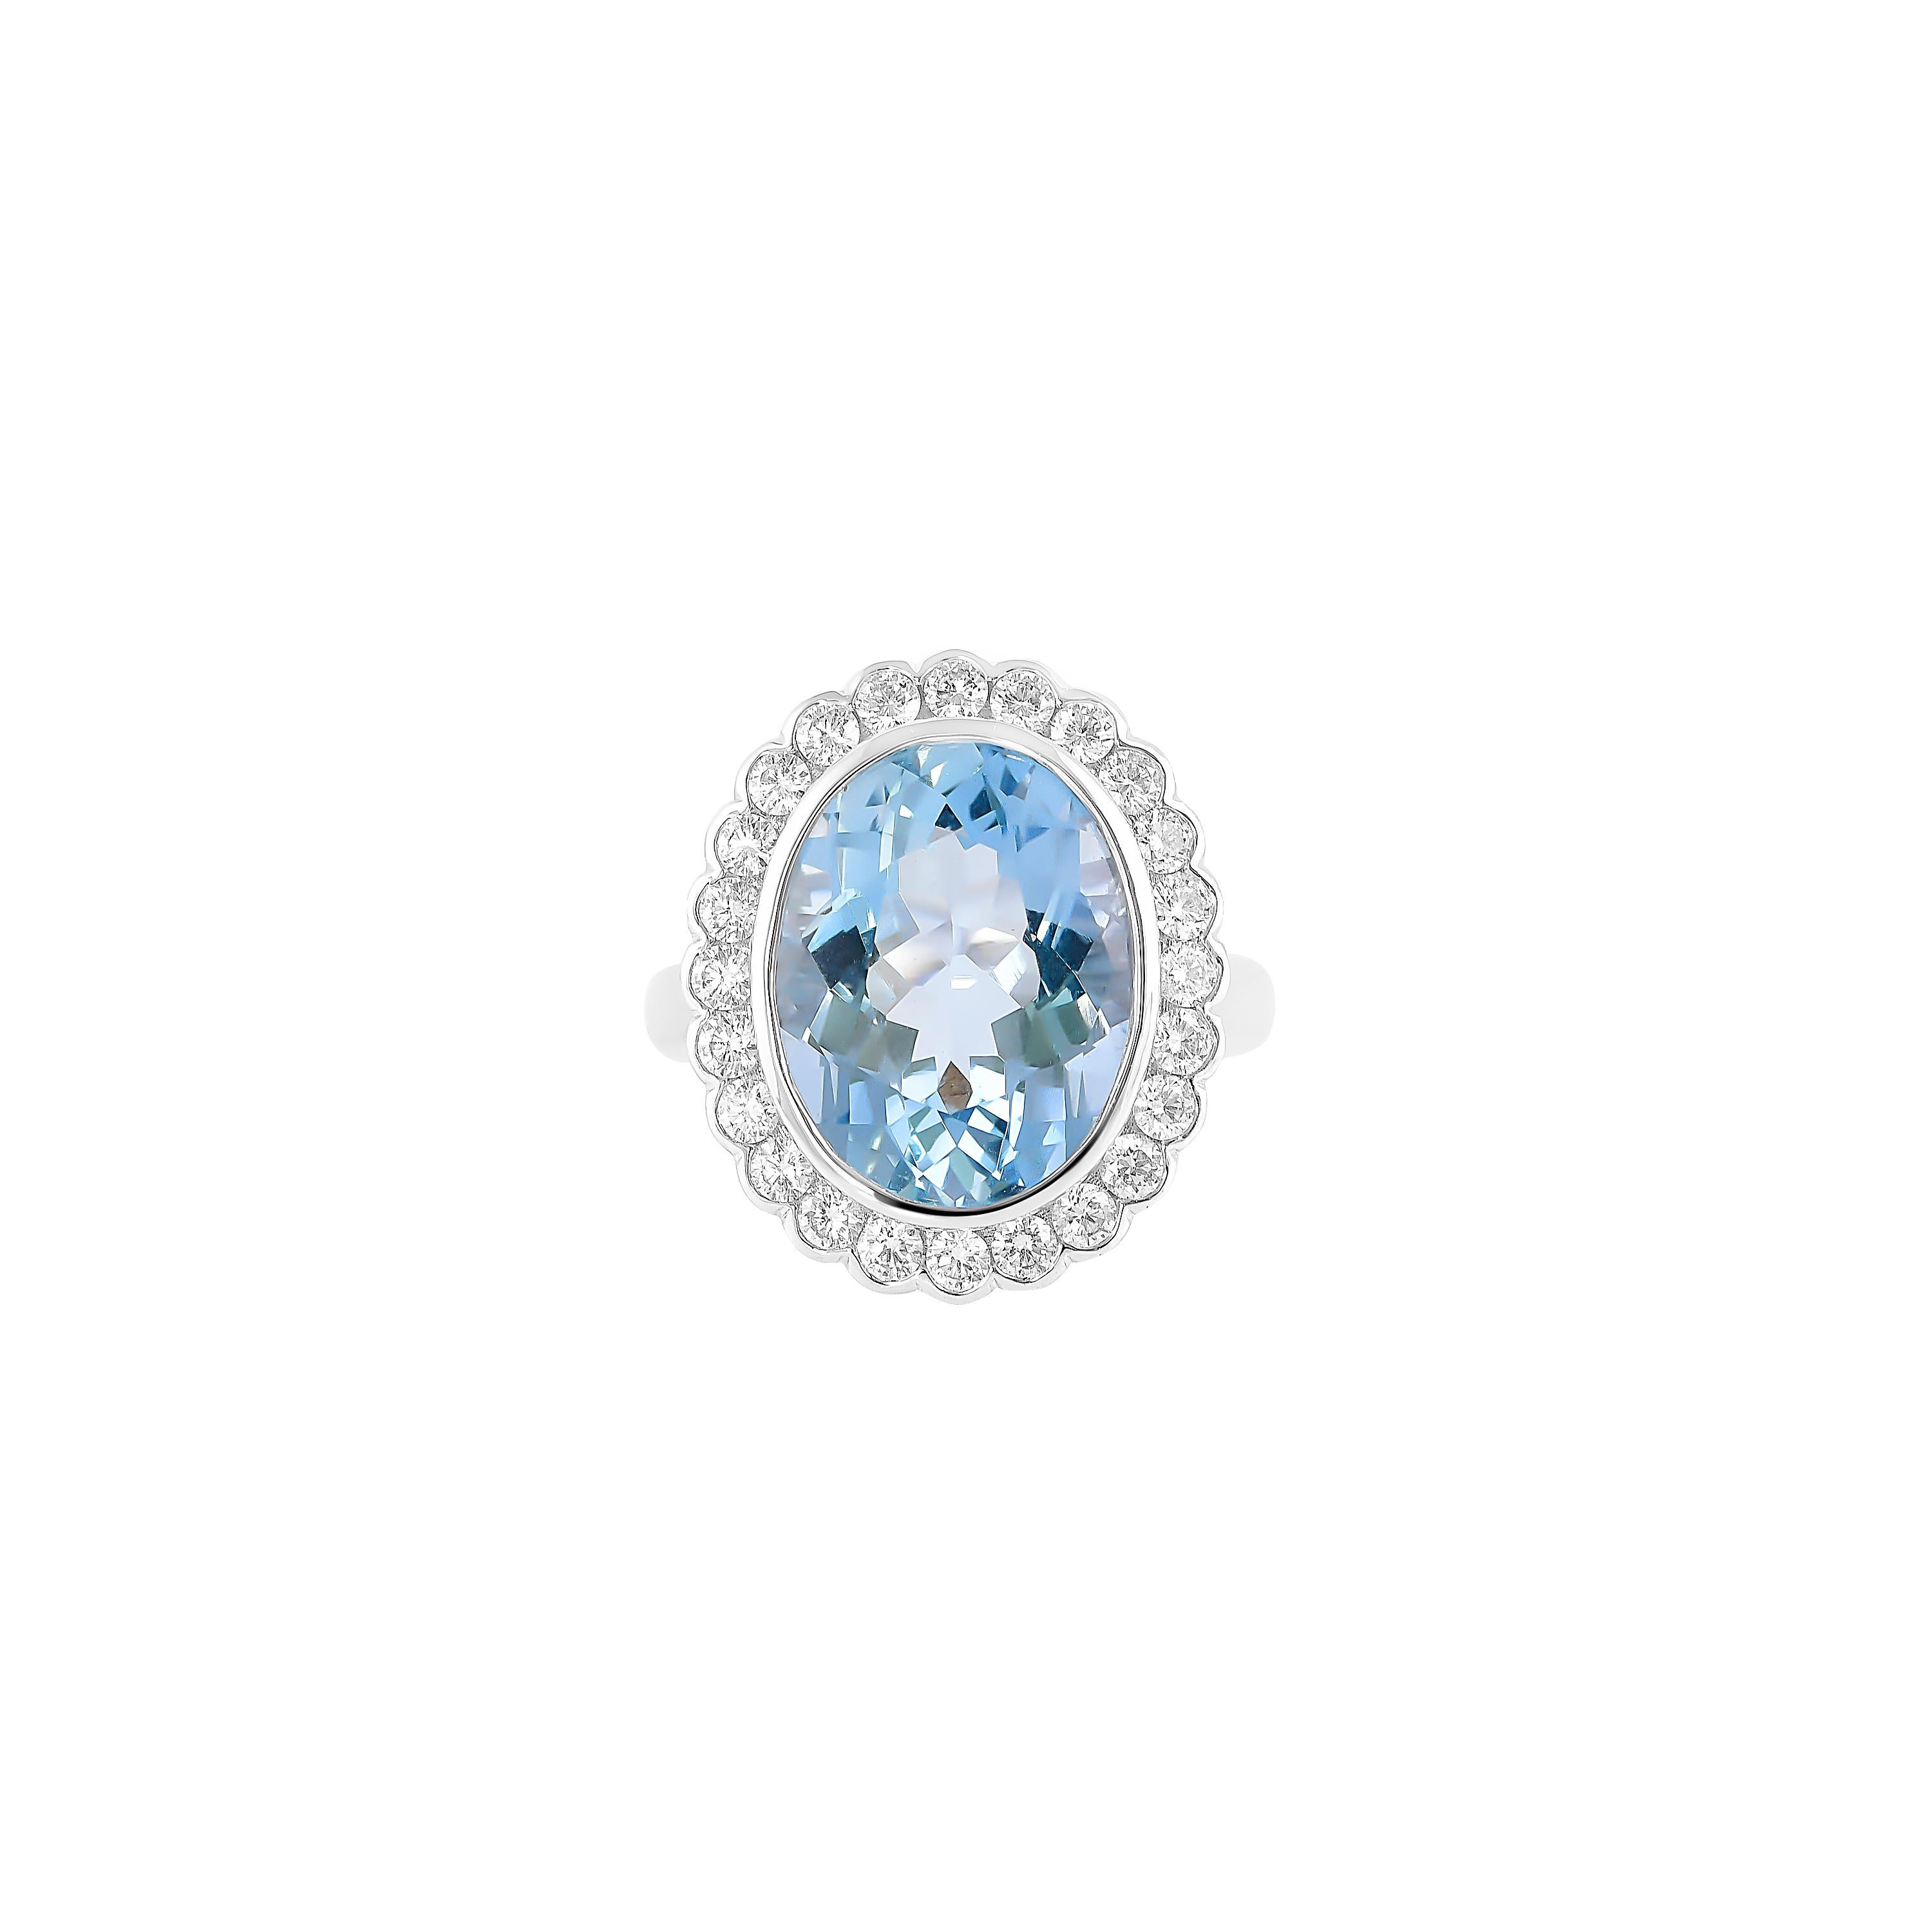 Oval Cut 7.1 Carat Aquamarine and Diamond Ring in 18 Karat White Gold For Sale